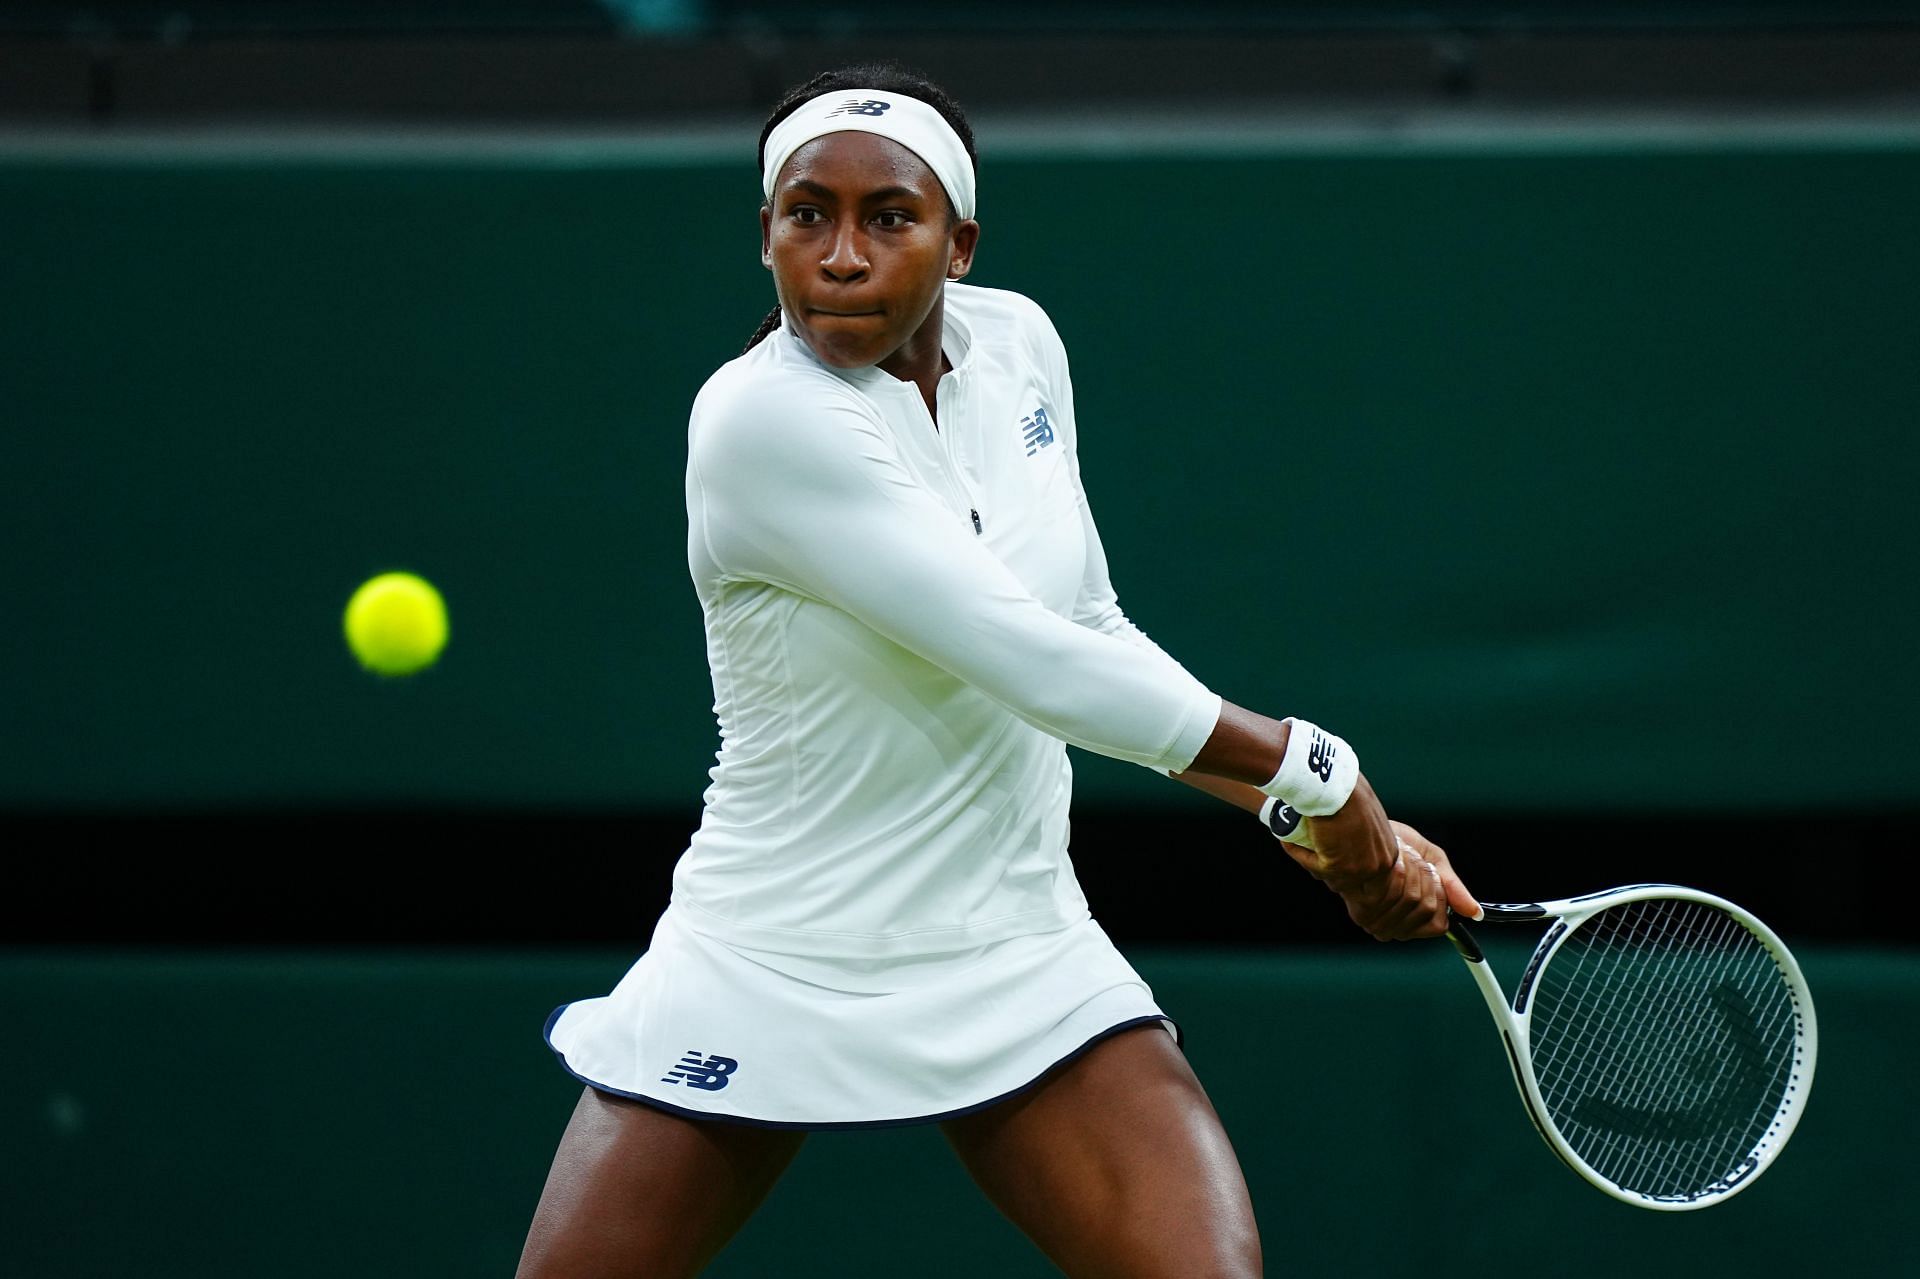 Coco Gauff attempts to strike the ball at Wimbledon 2021